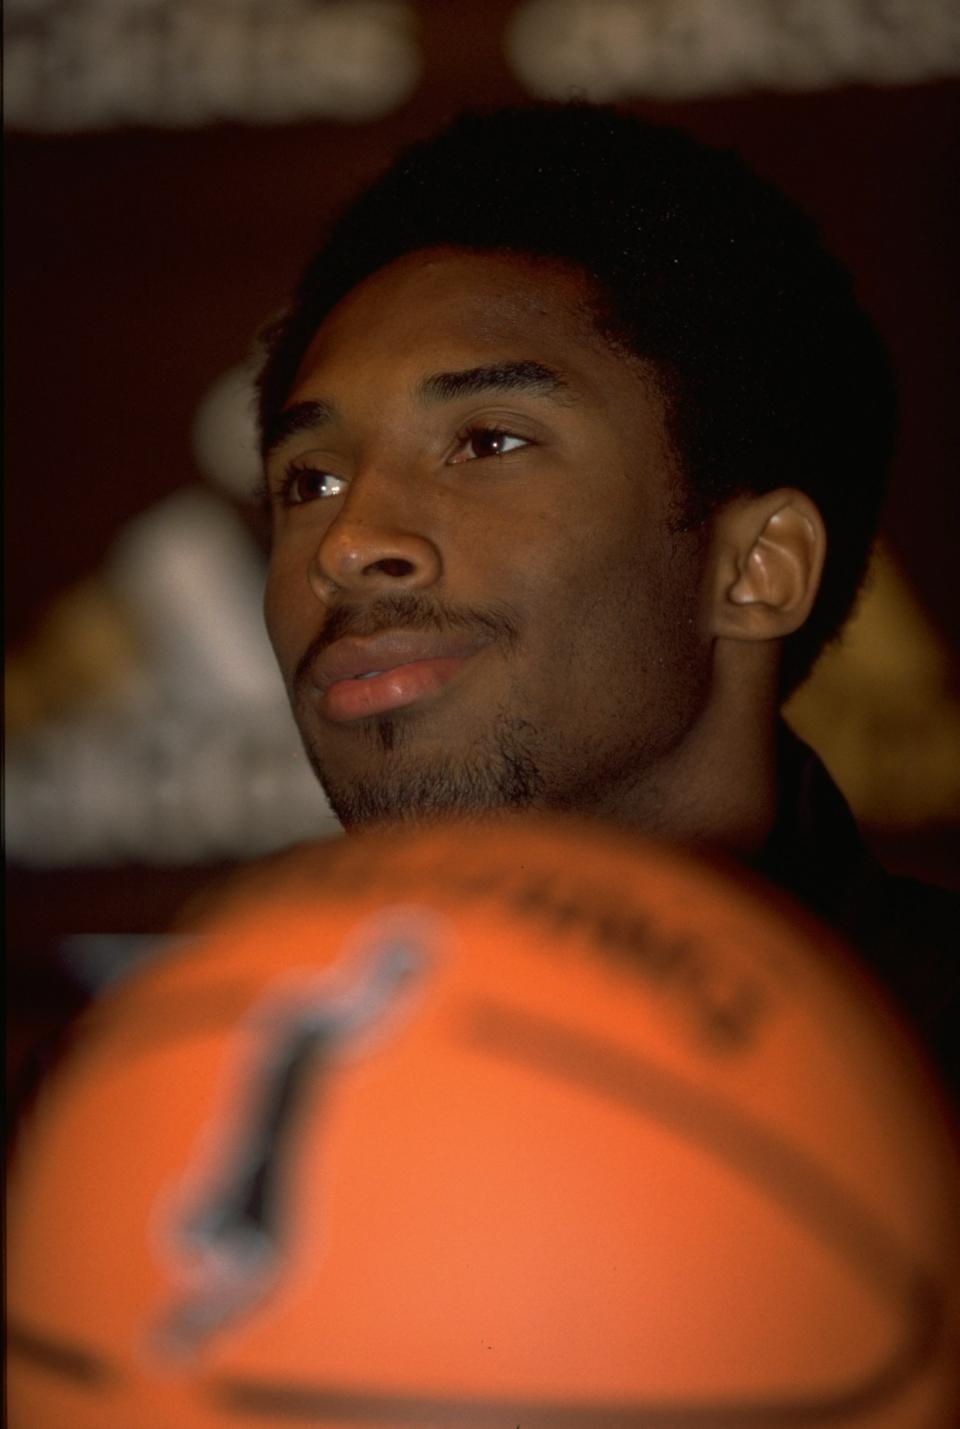 Aug 1998: Portrait of Kobe Bryant during a conference at an Adidas promotional tour of Sydney, Australia.